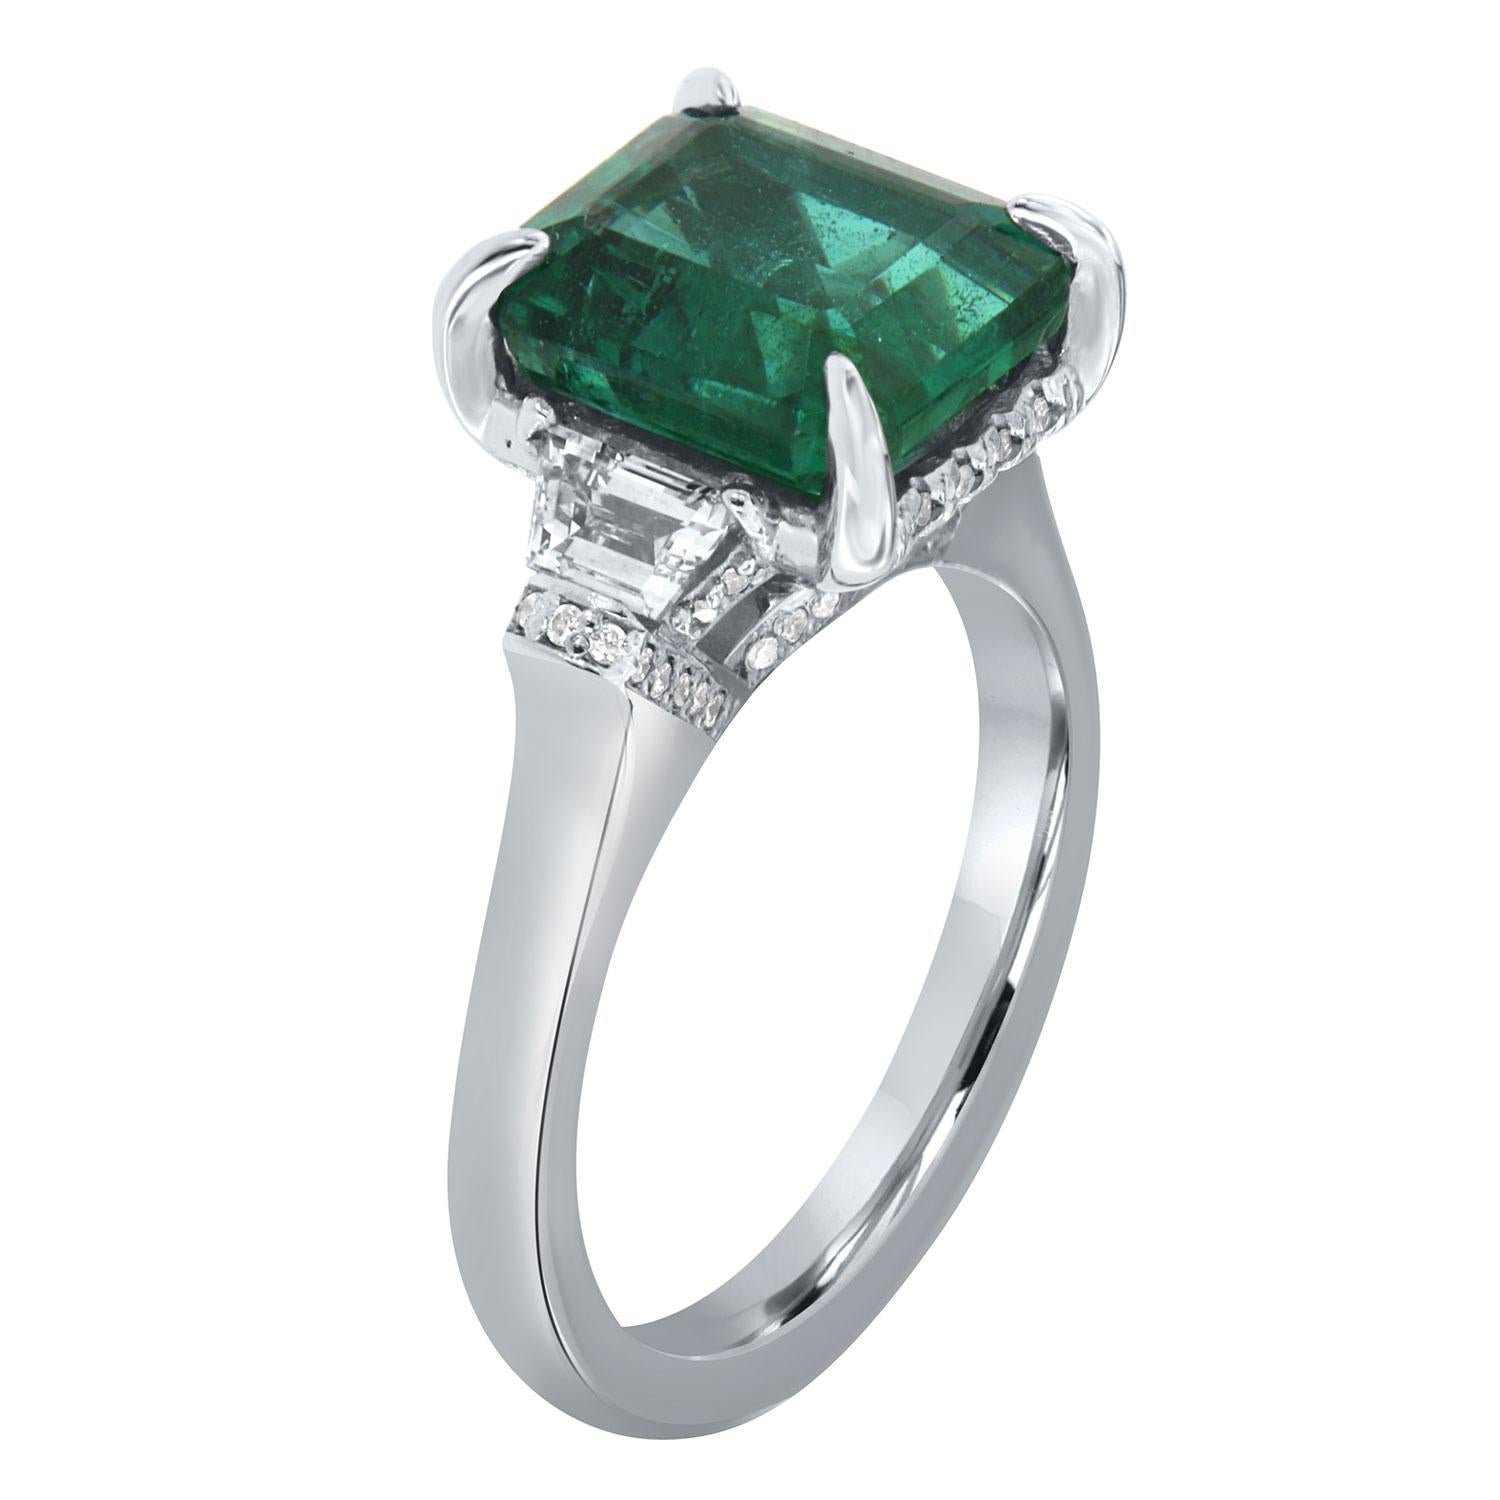 This Hand-Crafted stunning ring features 3.87- Carat  Zambian Vibrant Green Emerald GIA Certified encircled by a  hidden halo of delicate diamonds Micro-Prong set. The emerald is flanked by two perfectly matched Trapeze-shaped diamonds 0.53 carat